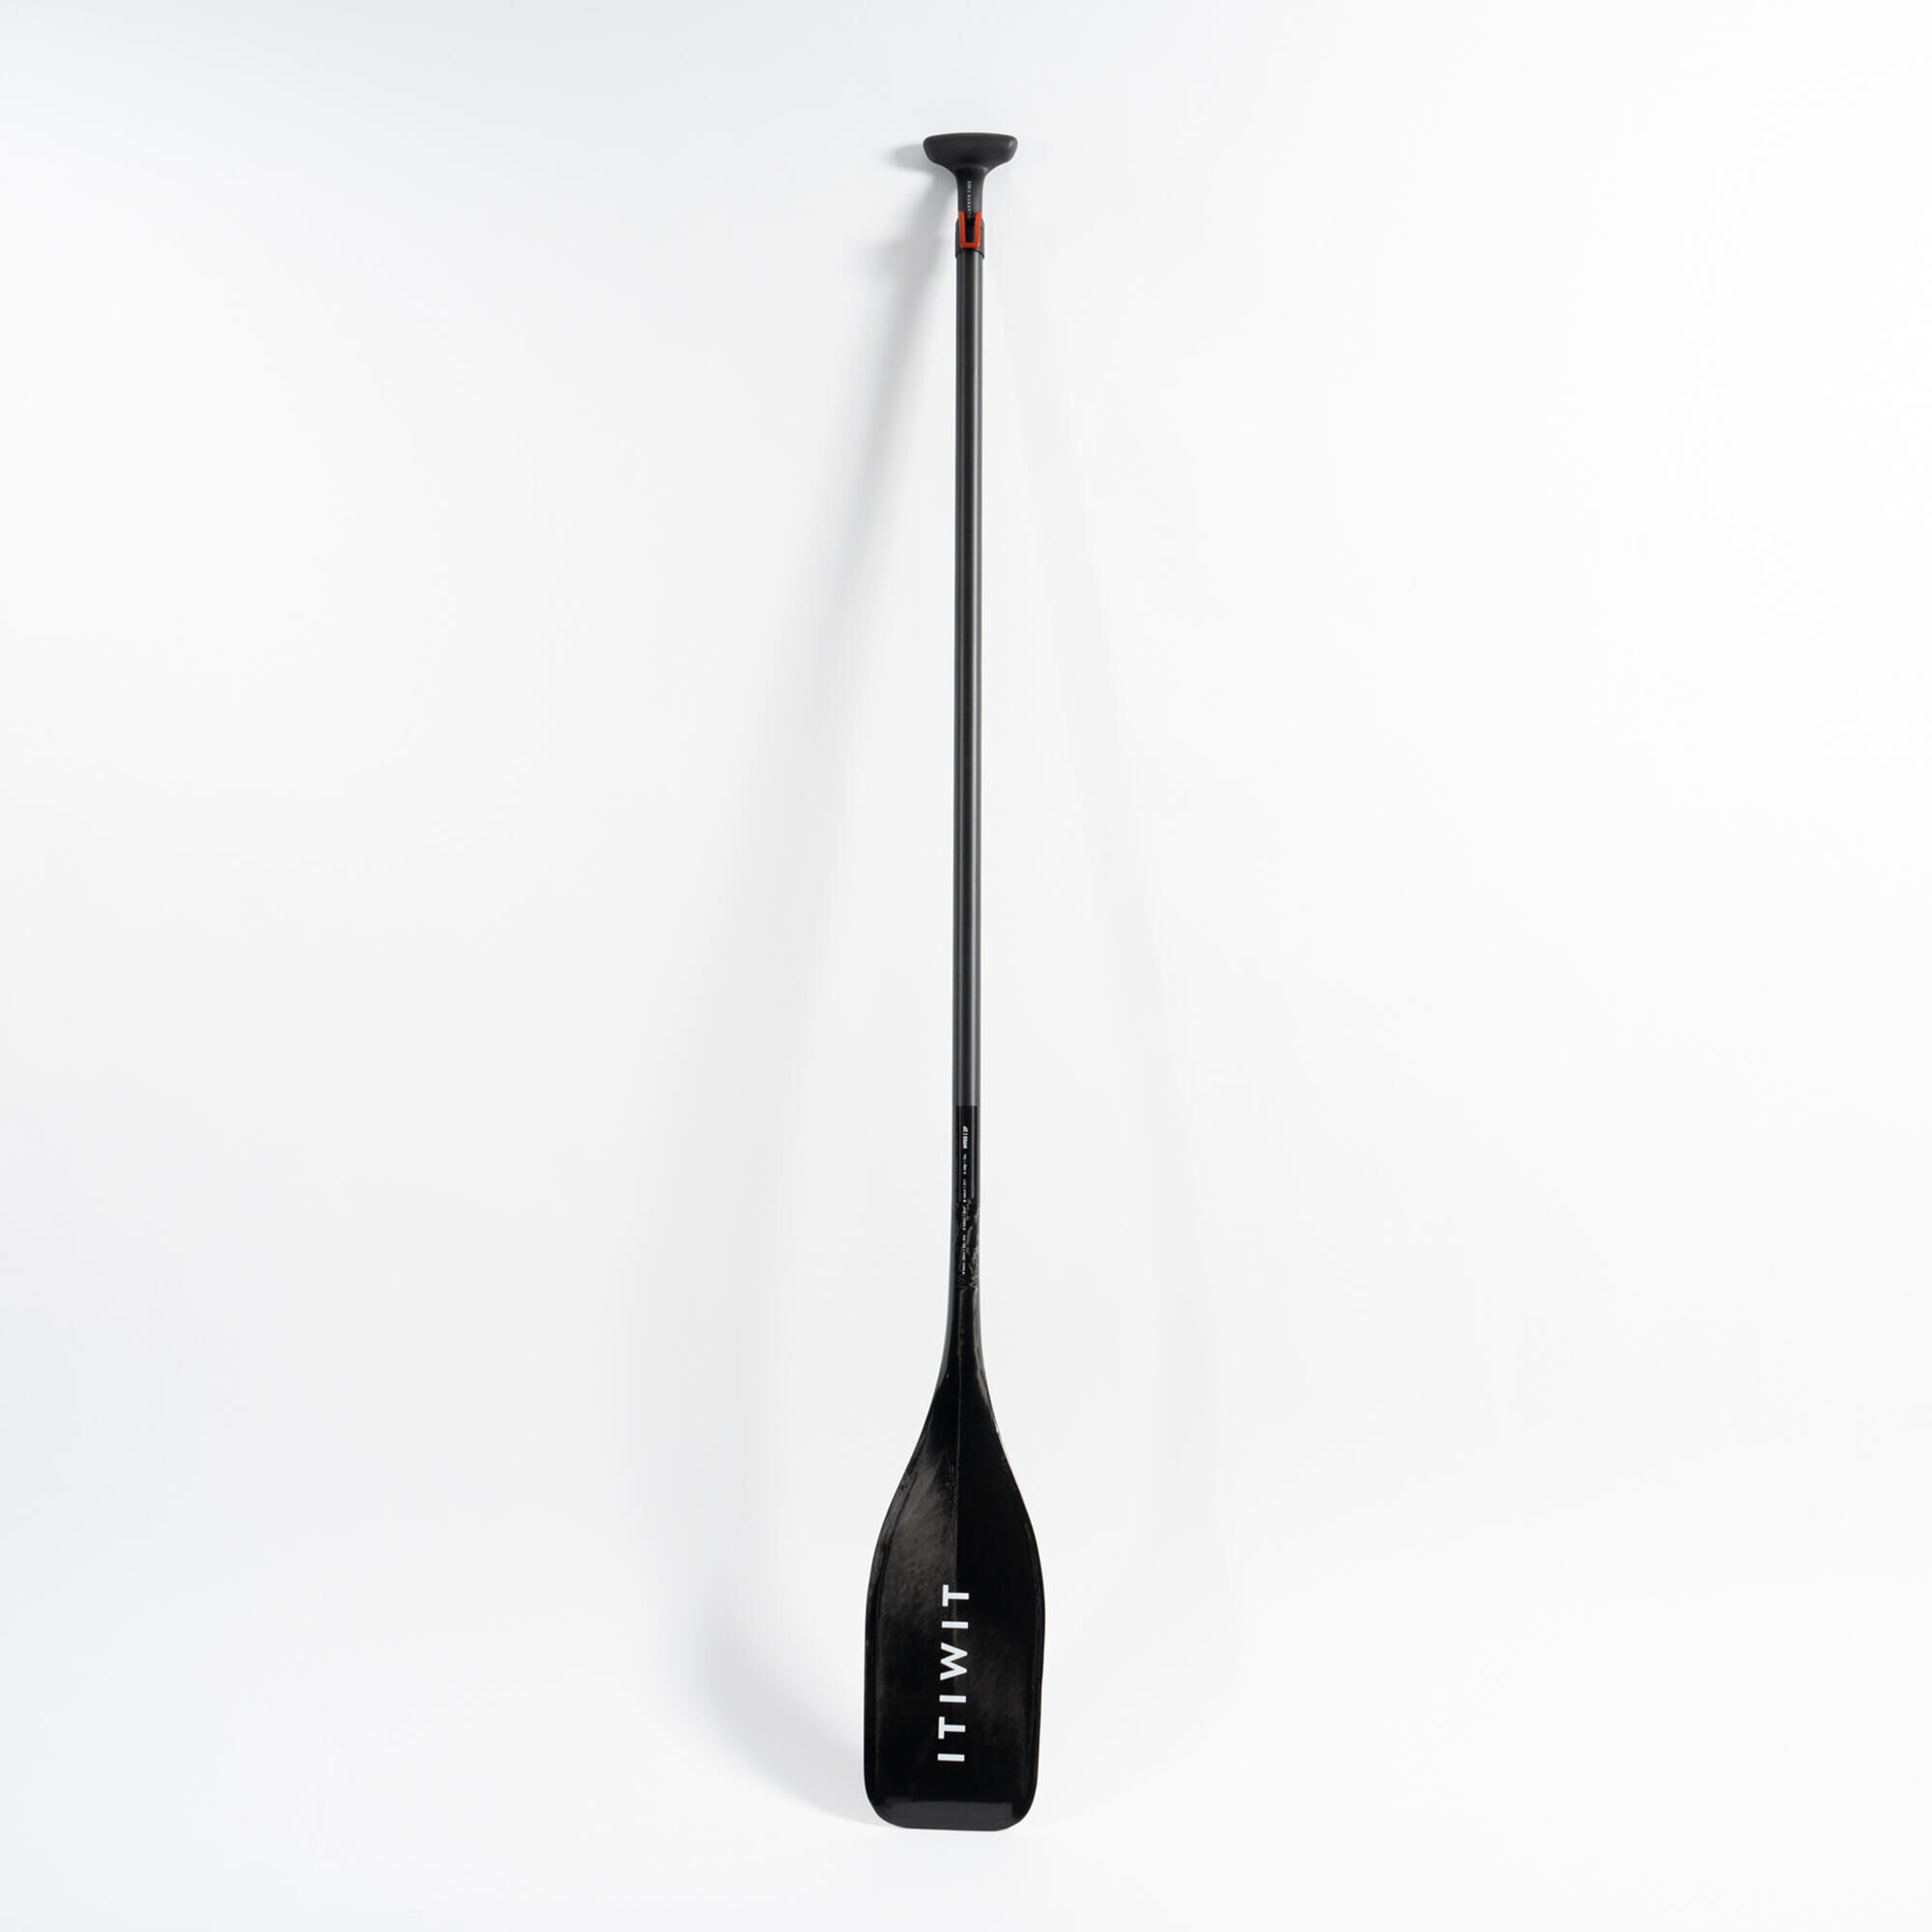 ITIWIT SUP paddle 900 pro carbon, adjustable in 2 sections. (165–205 cm)